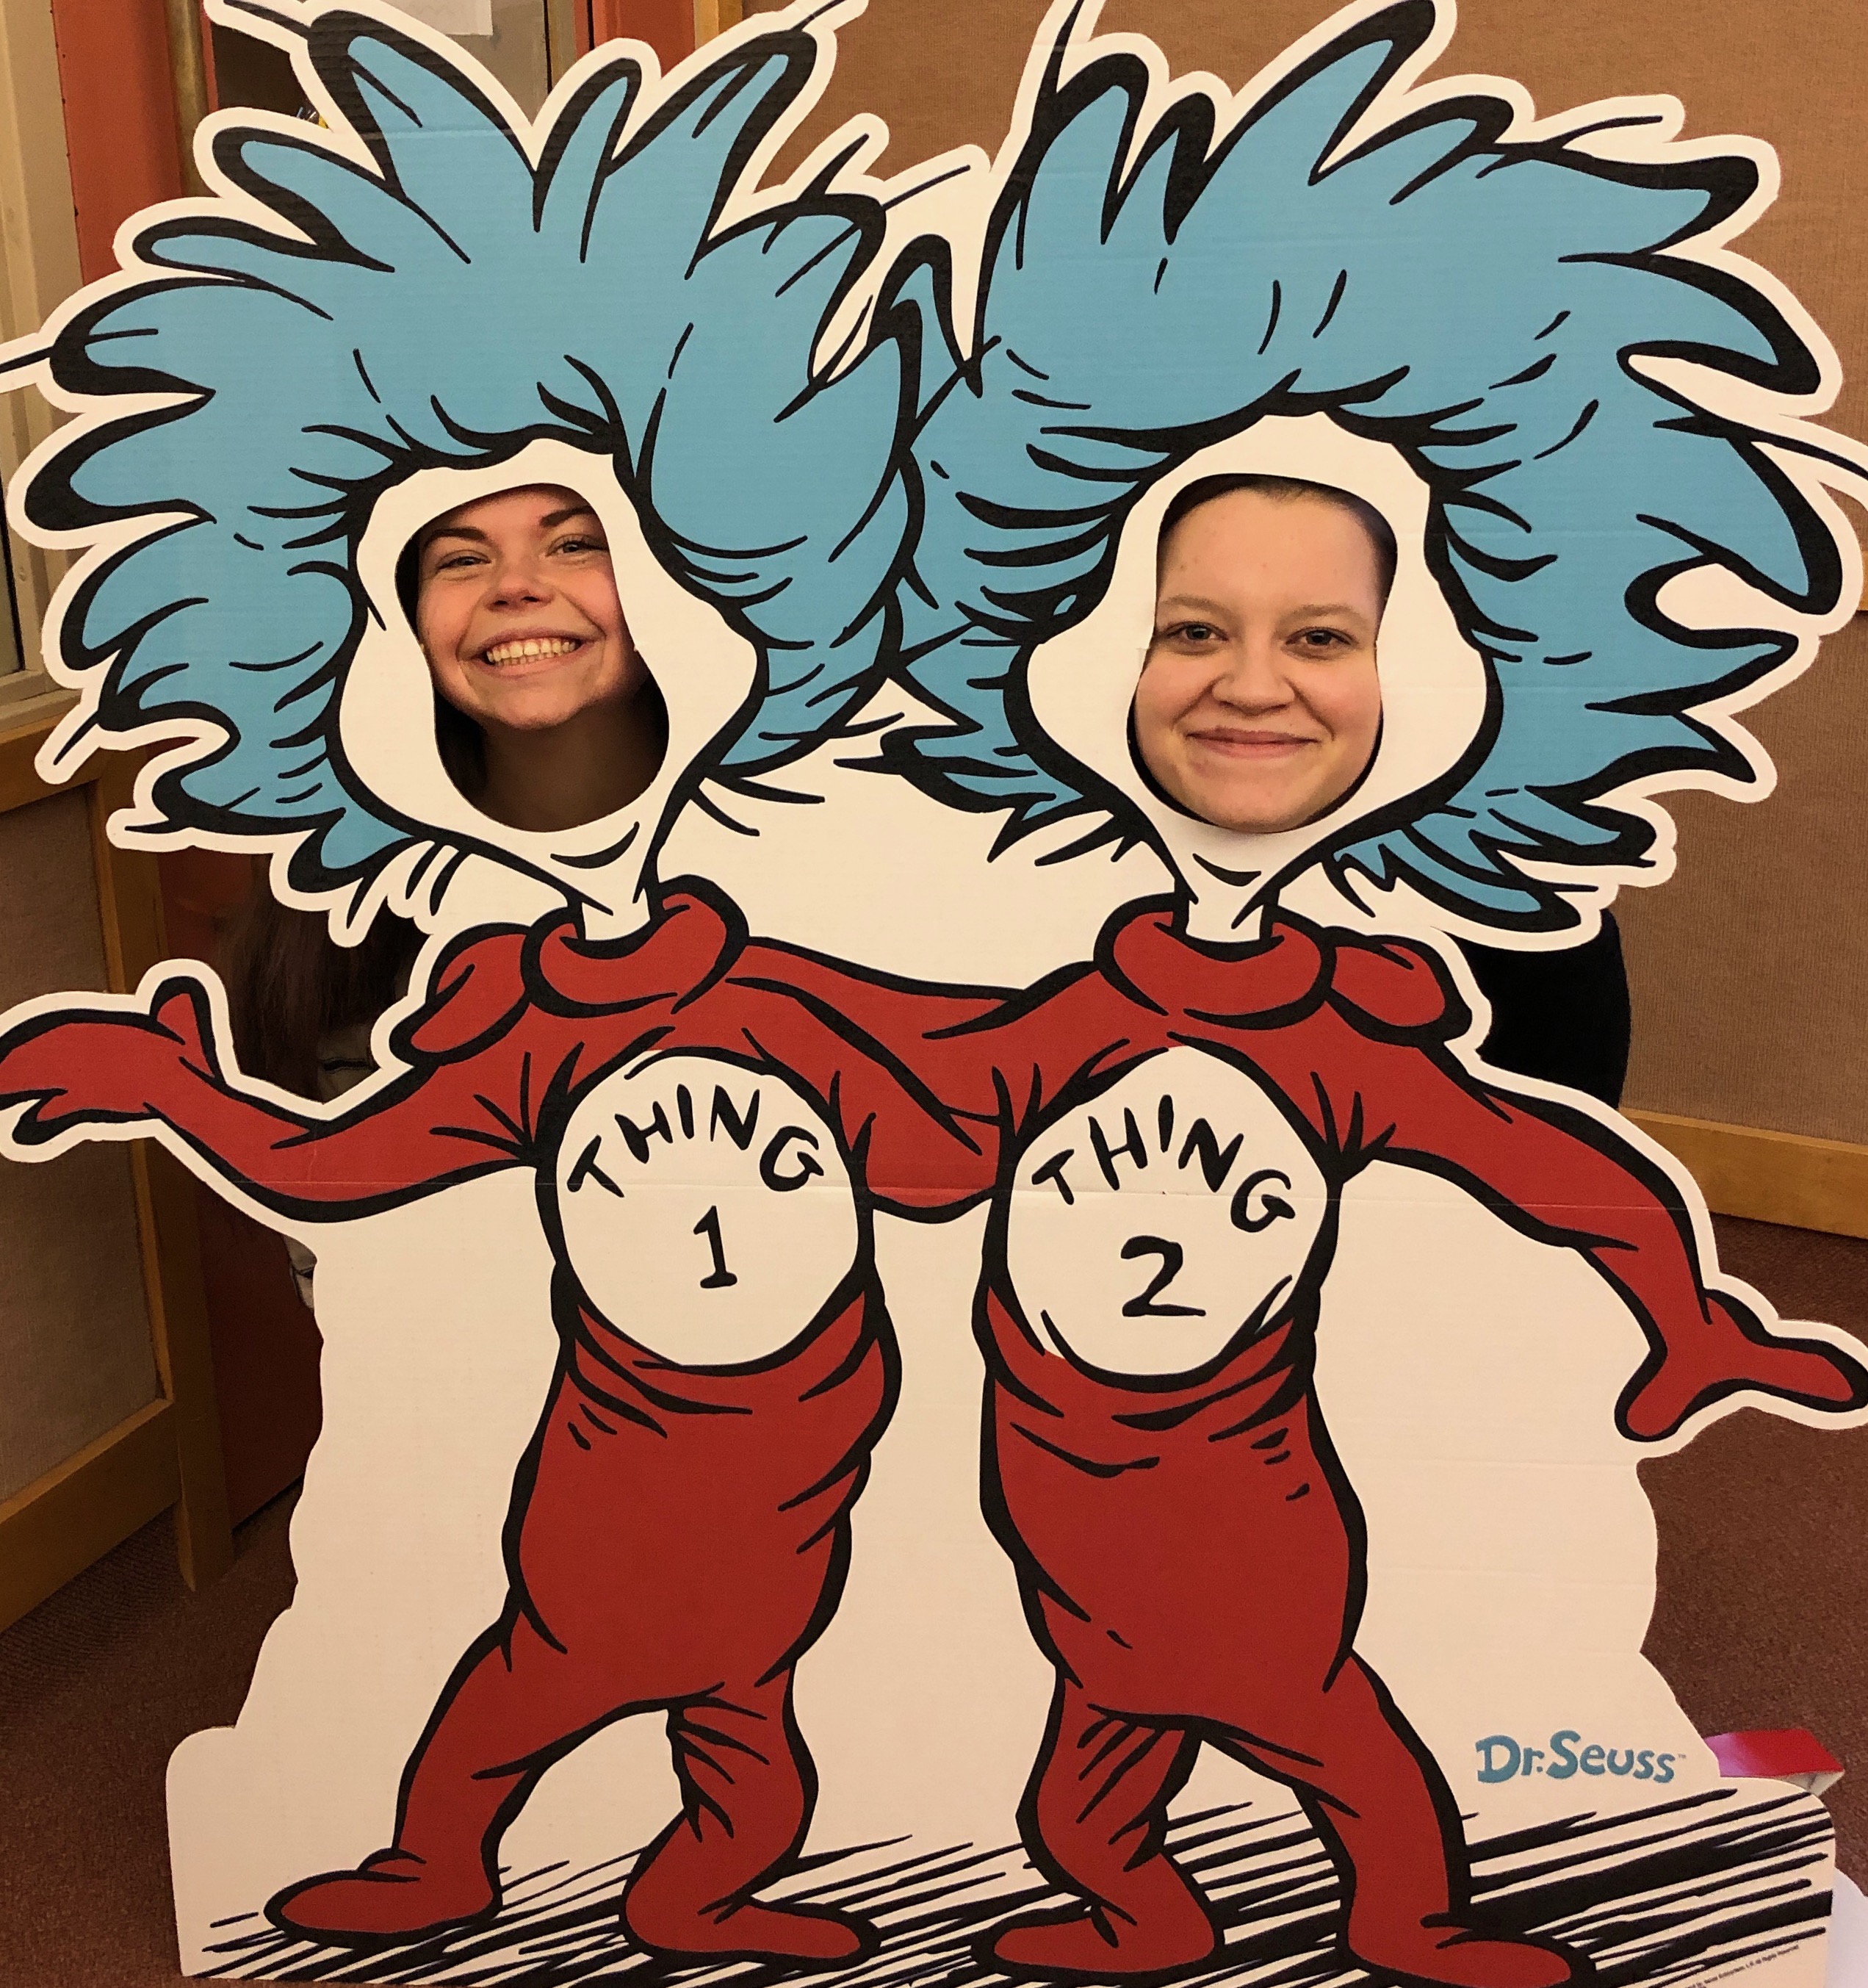 Two girls' faces are seen in "Thing 1 and Thing 2" cut-outs